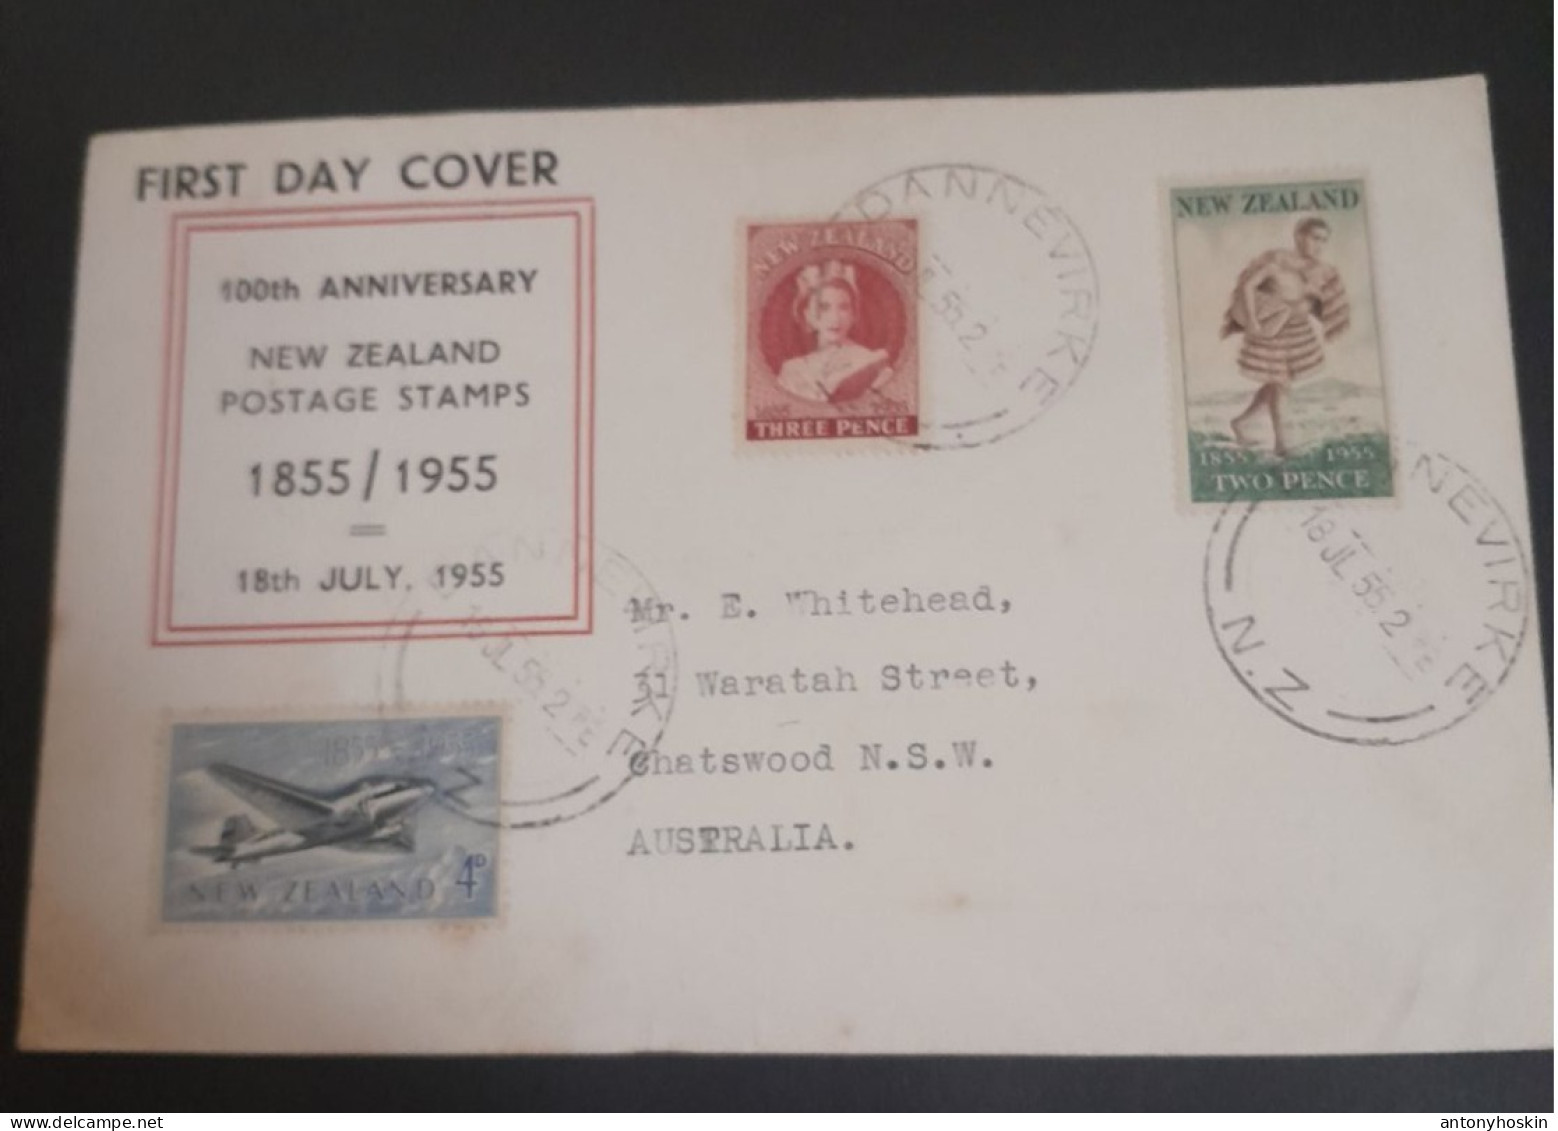 1855-1955 New Zealand Postage Stamps 100 Th Anniversary First Day Cover. - Storia Postale